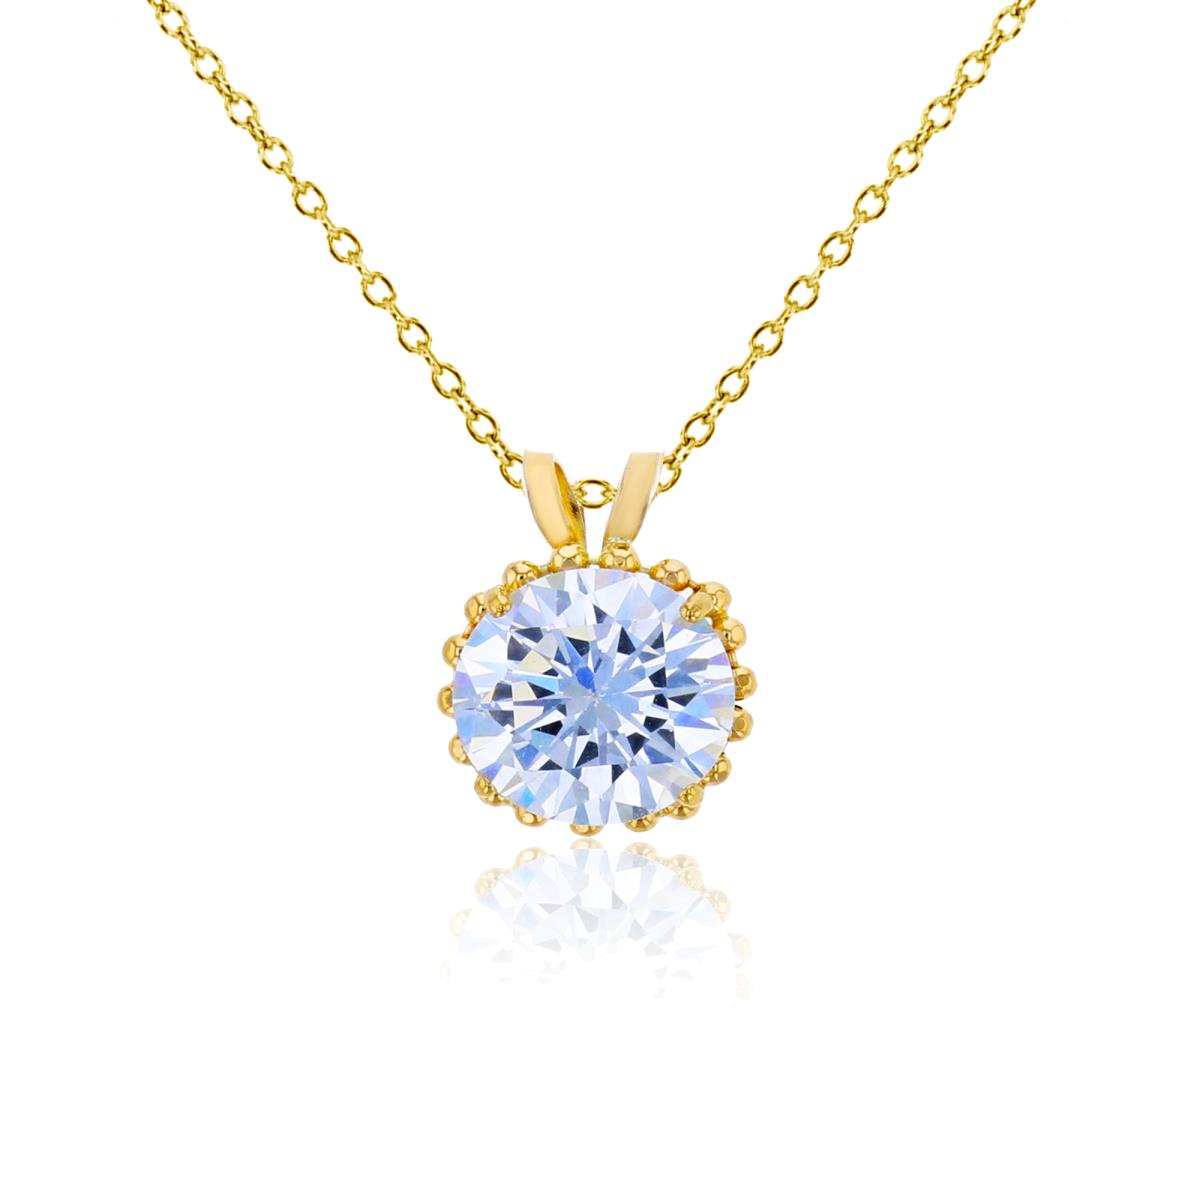 10K Yellow Gold 7mm Round Cut CZ with Bead Frame Rabbit Ear 18" Necklace